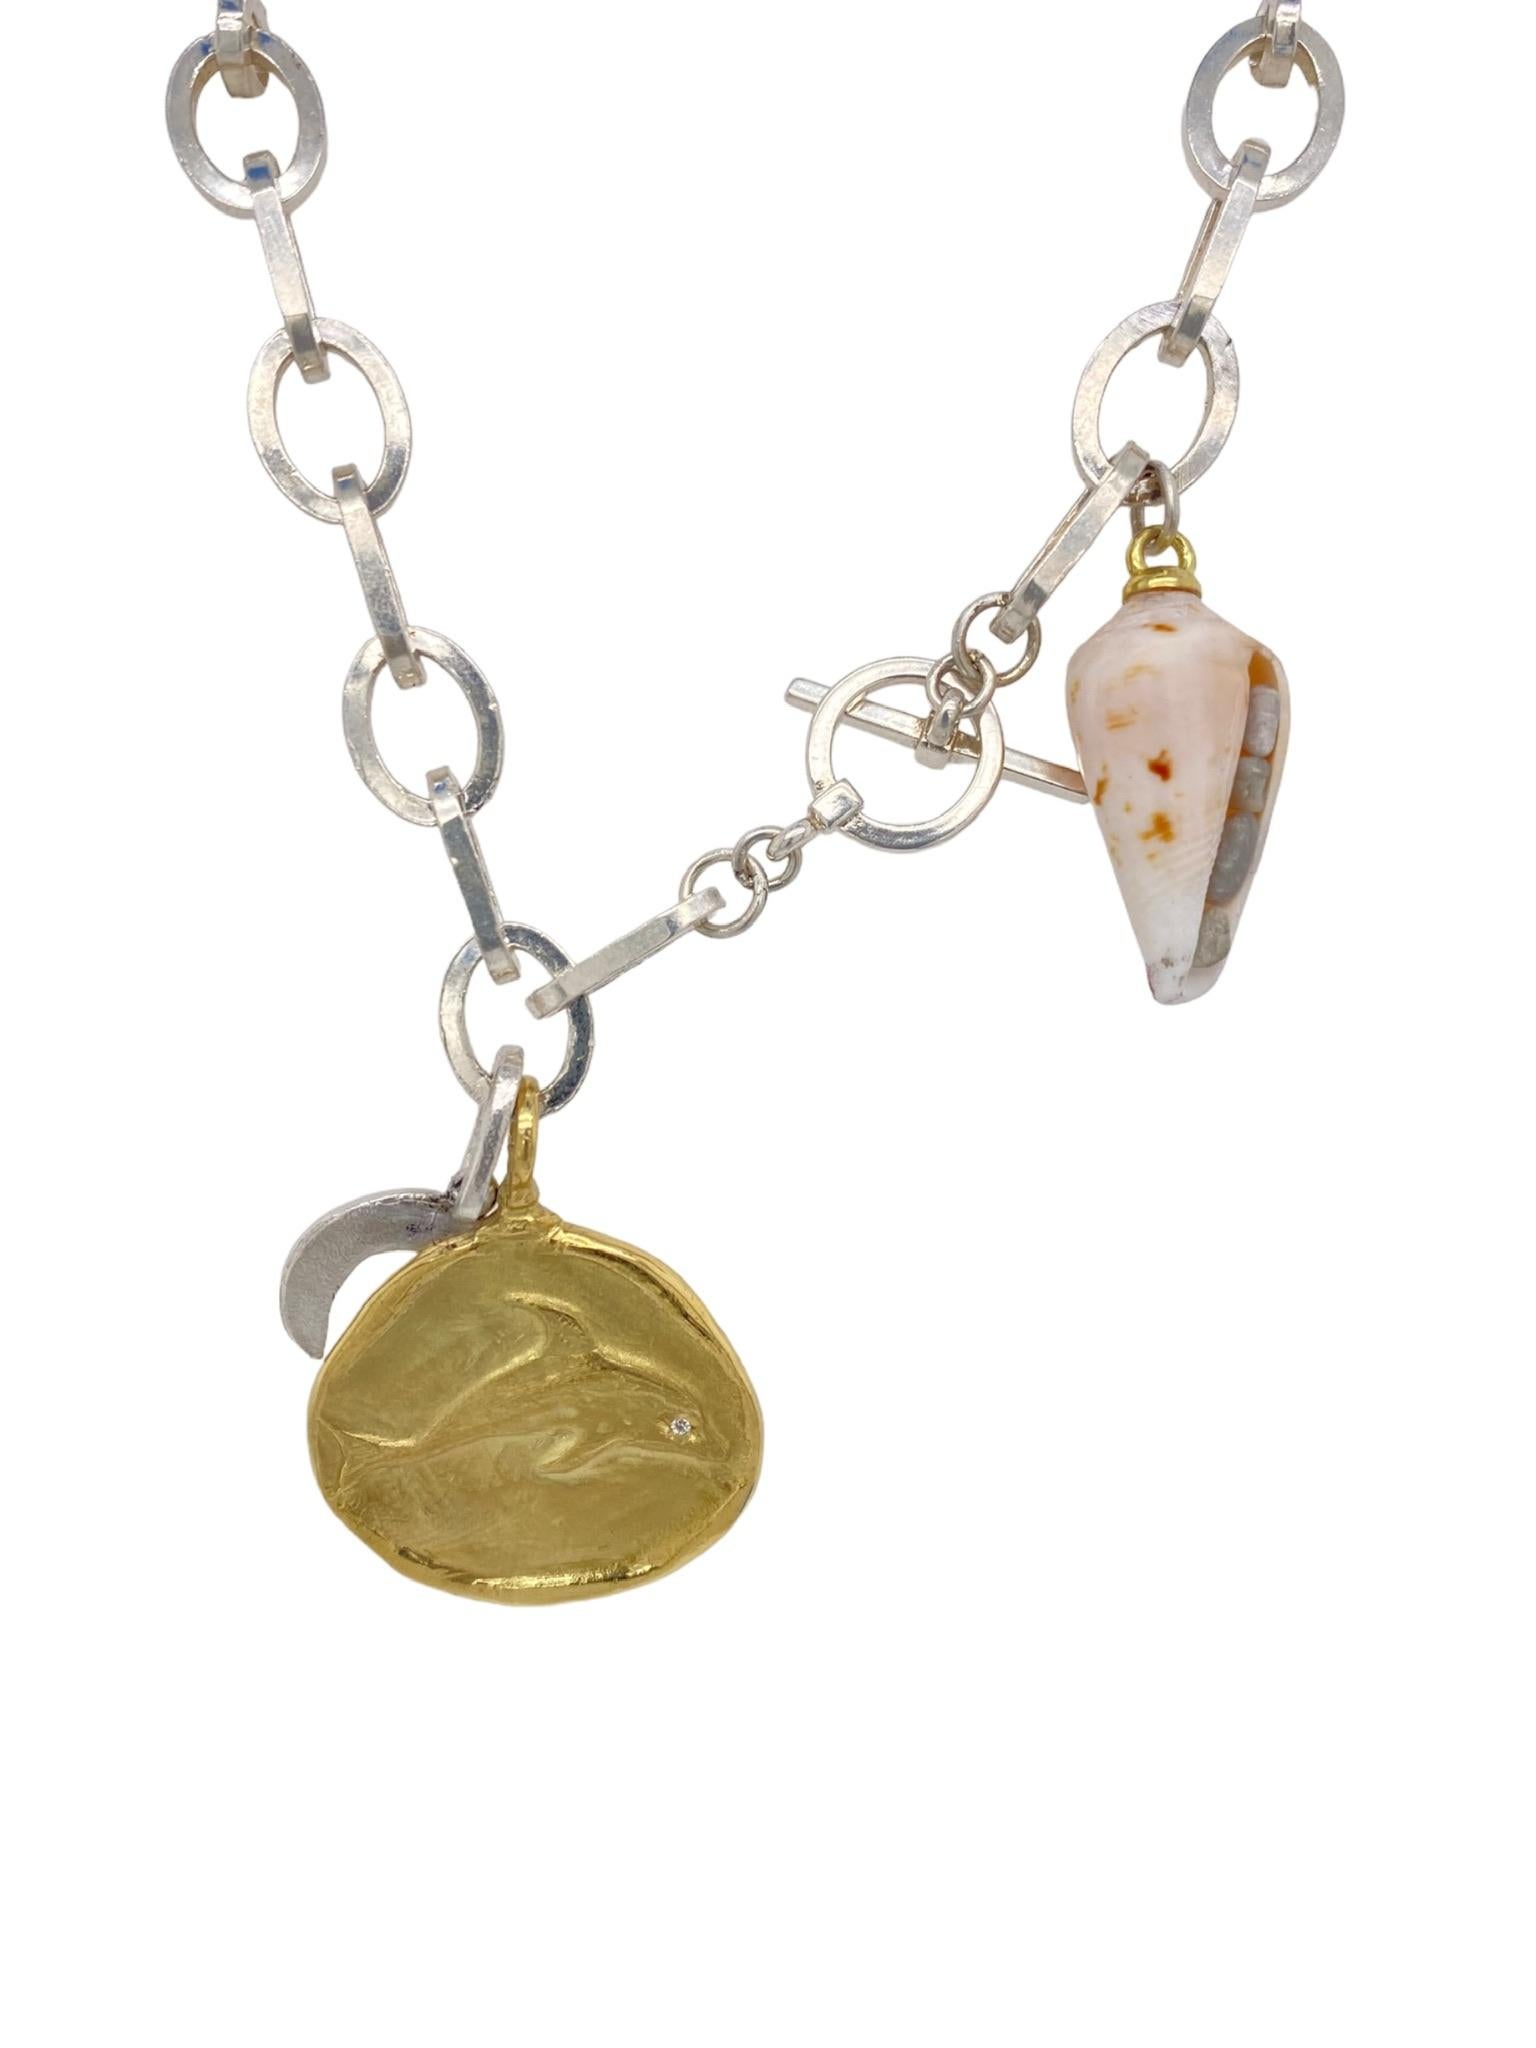 Brilliant Cut 18k gold dolphin shield and shell necklace with diamonds For Sale